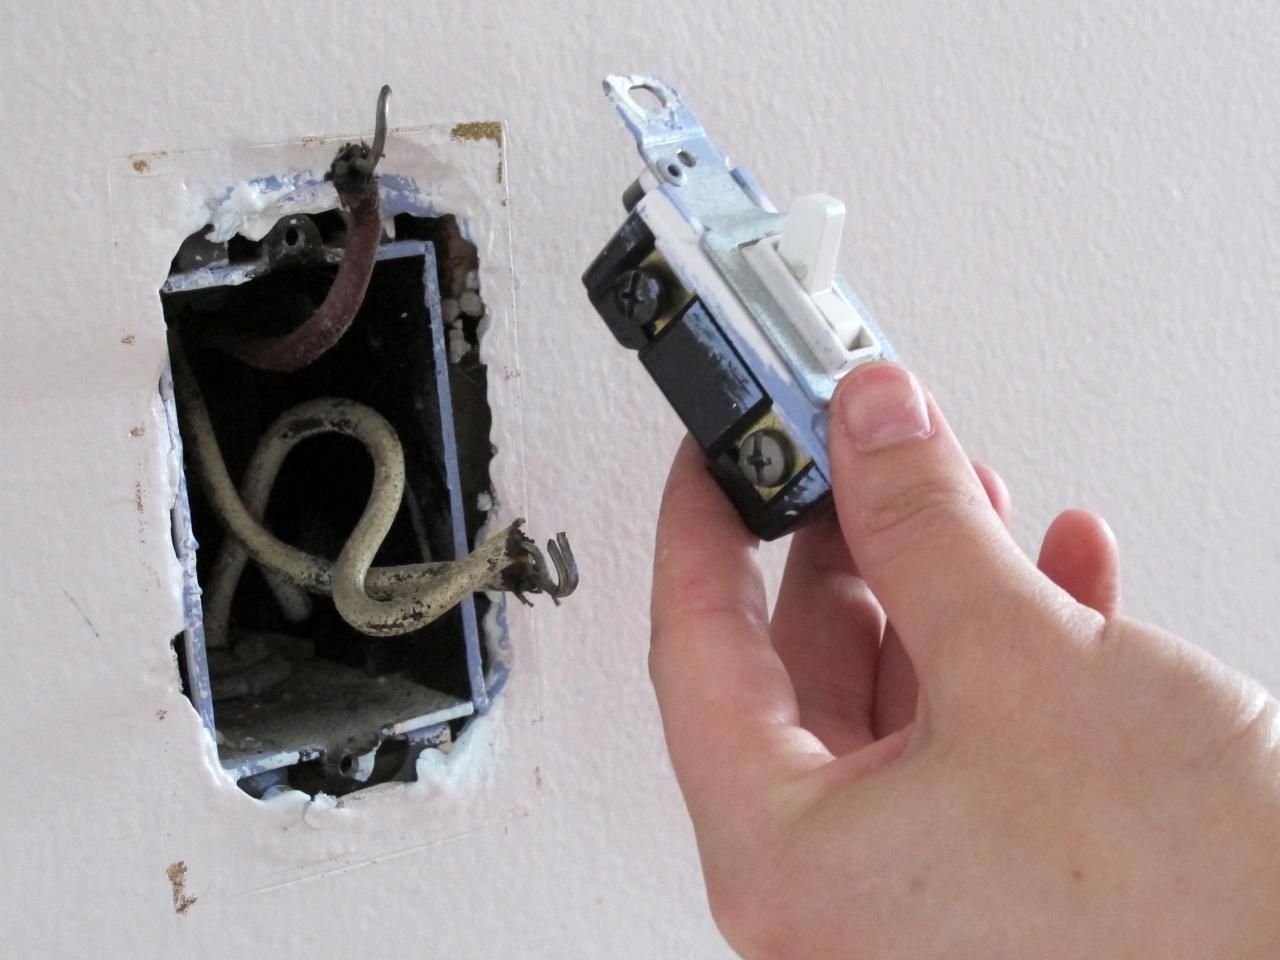 How To Install A Dimmer Switch, How To Make A Lamp Dimmer Switch Replace